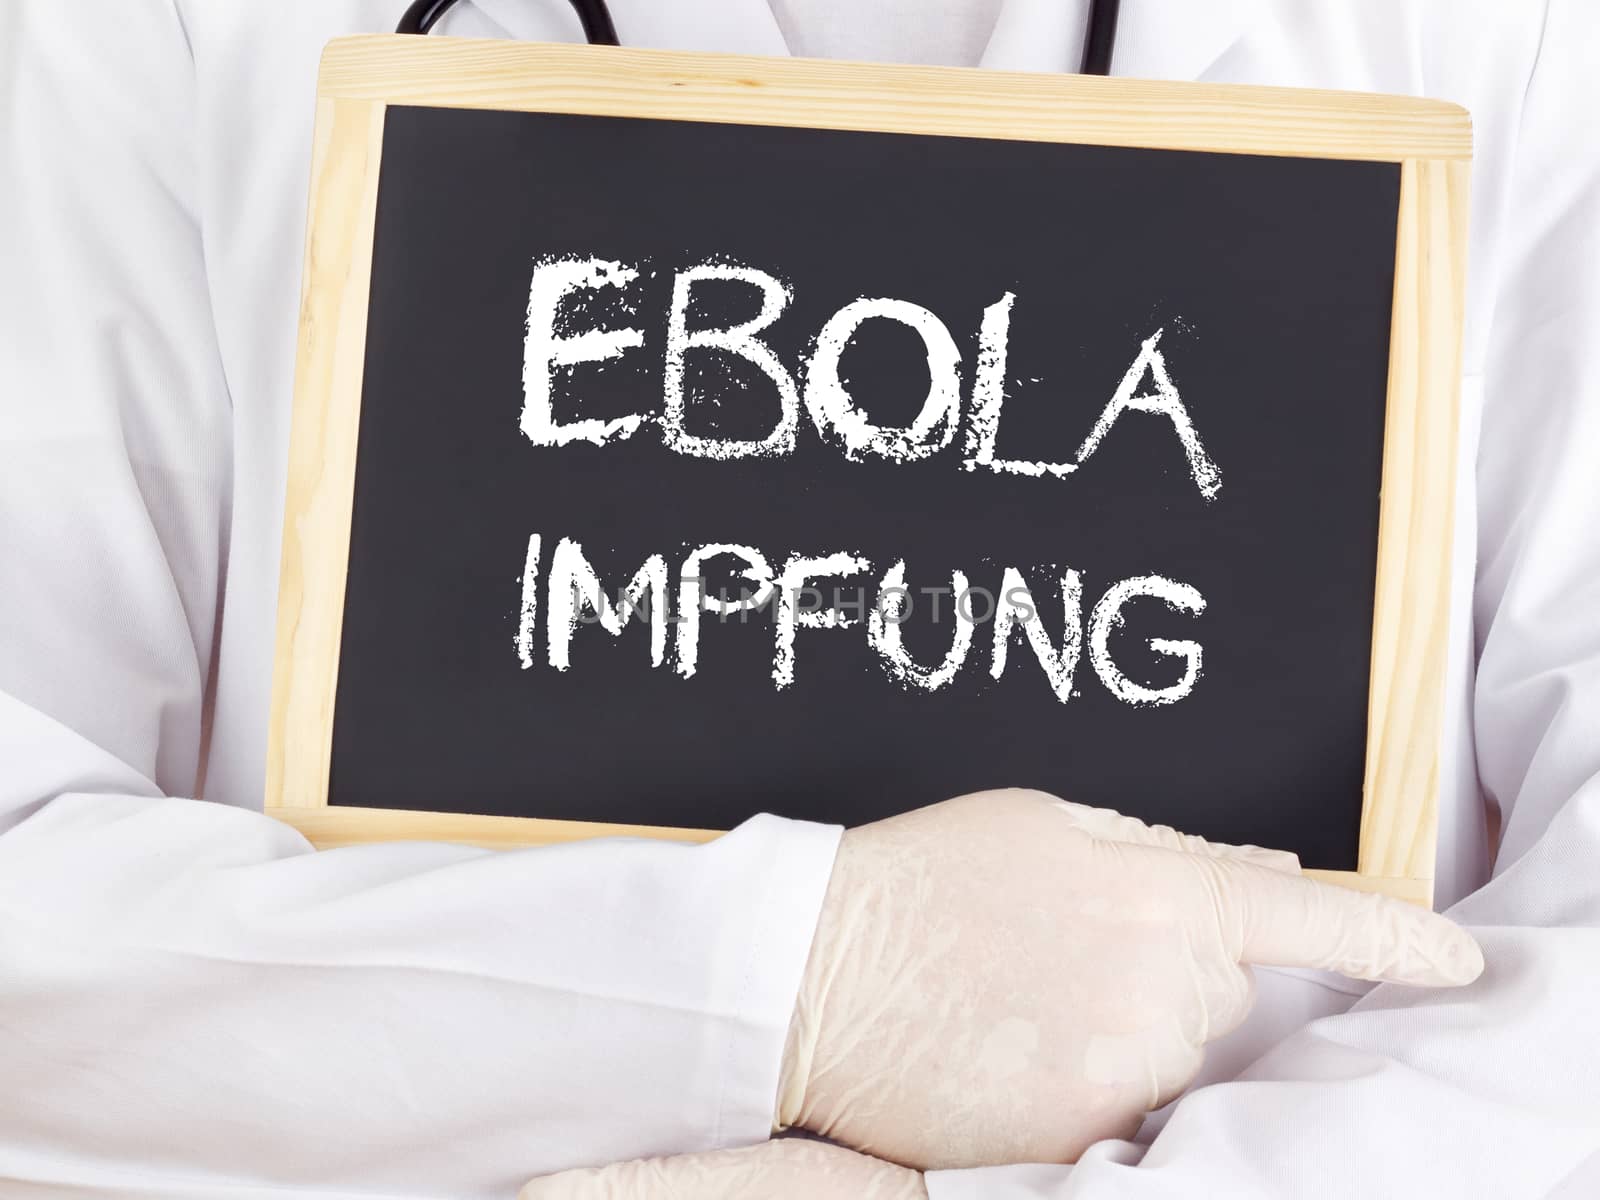 Doctor shows information: Ebola immunization in german by gwolters